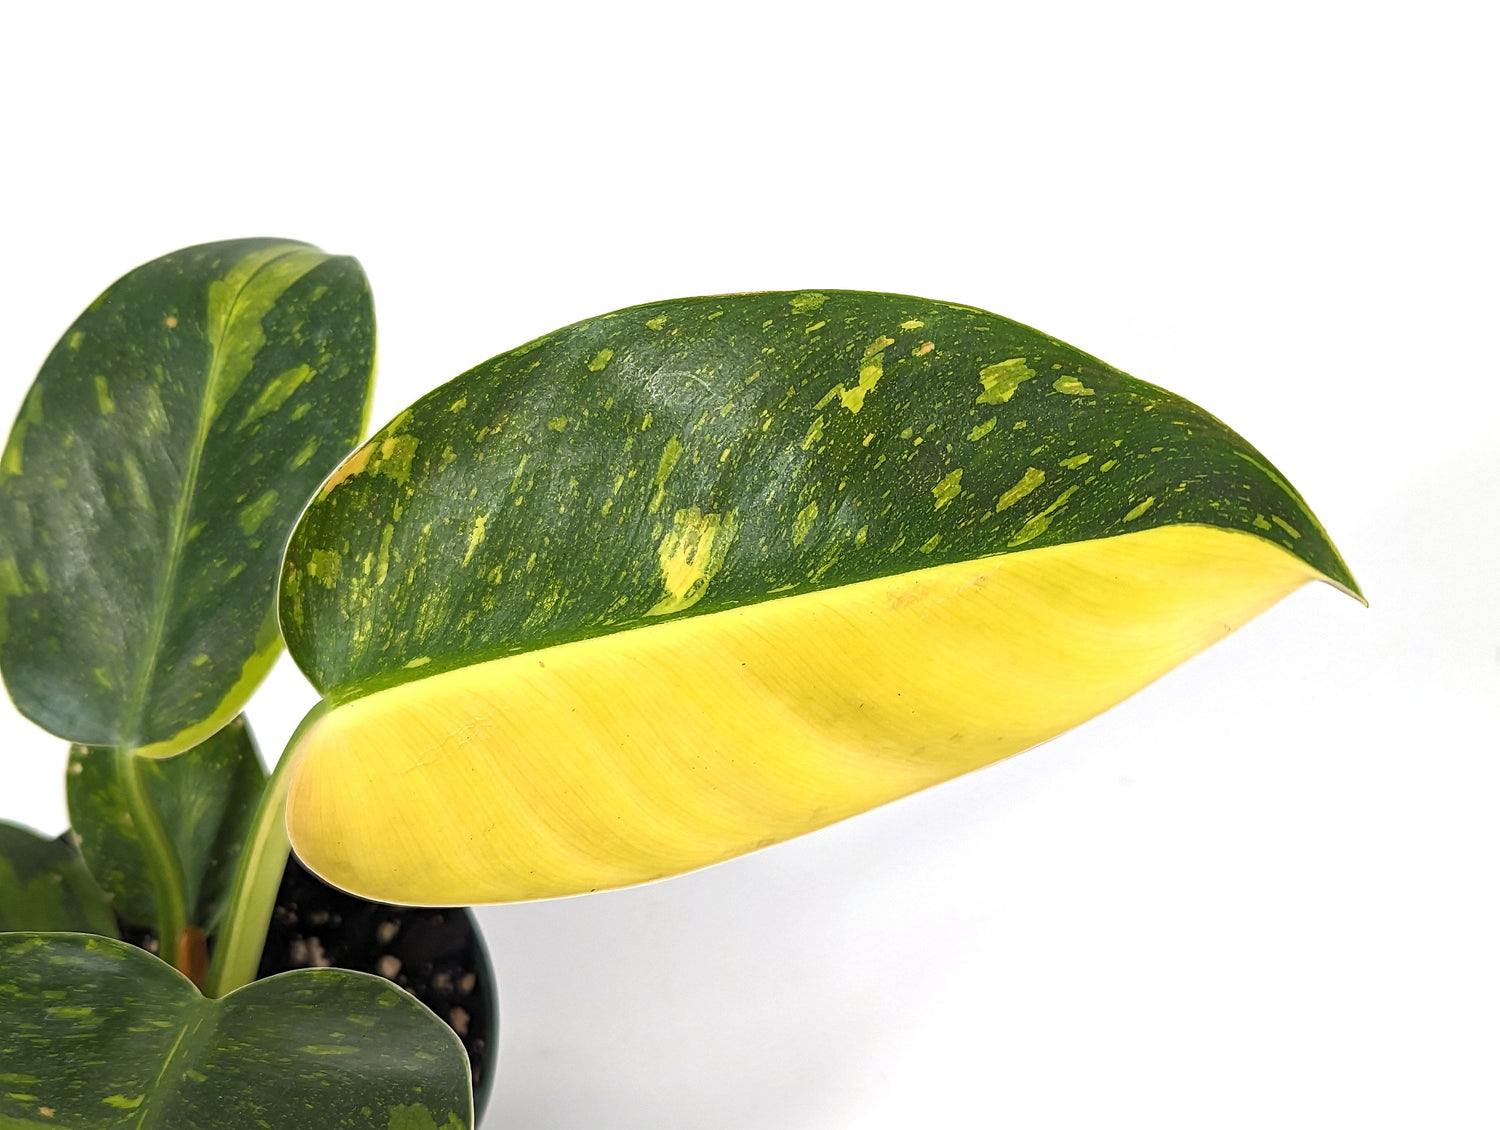 HALF MOON Philodendron Green Congo Variegated 4 inch Pot - Exact Plant Pictured One Of a Kind Amazing Color